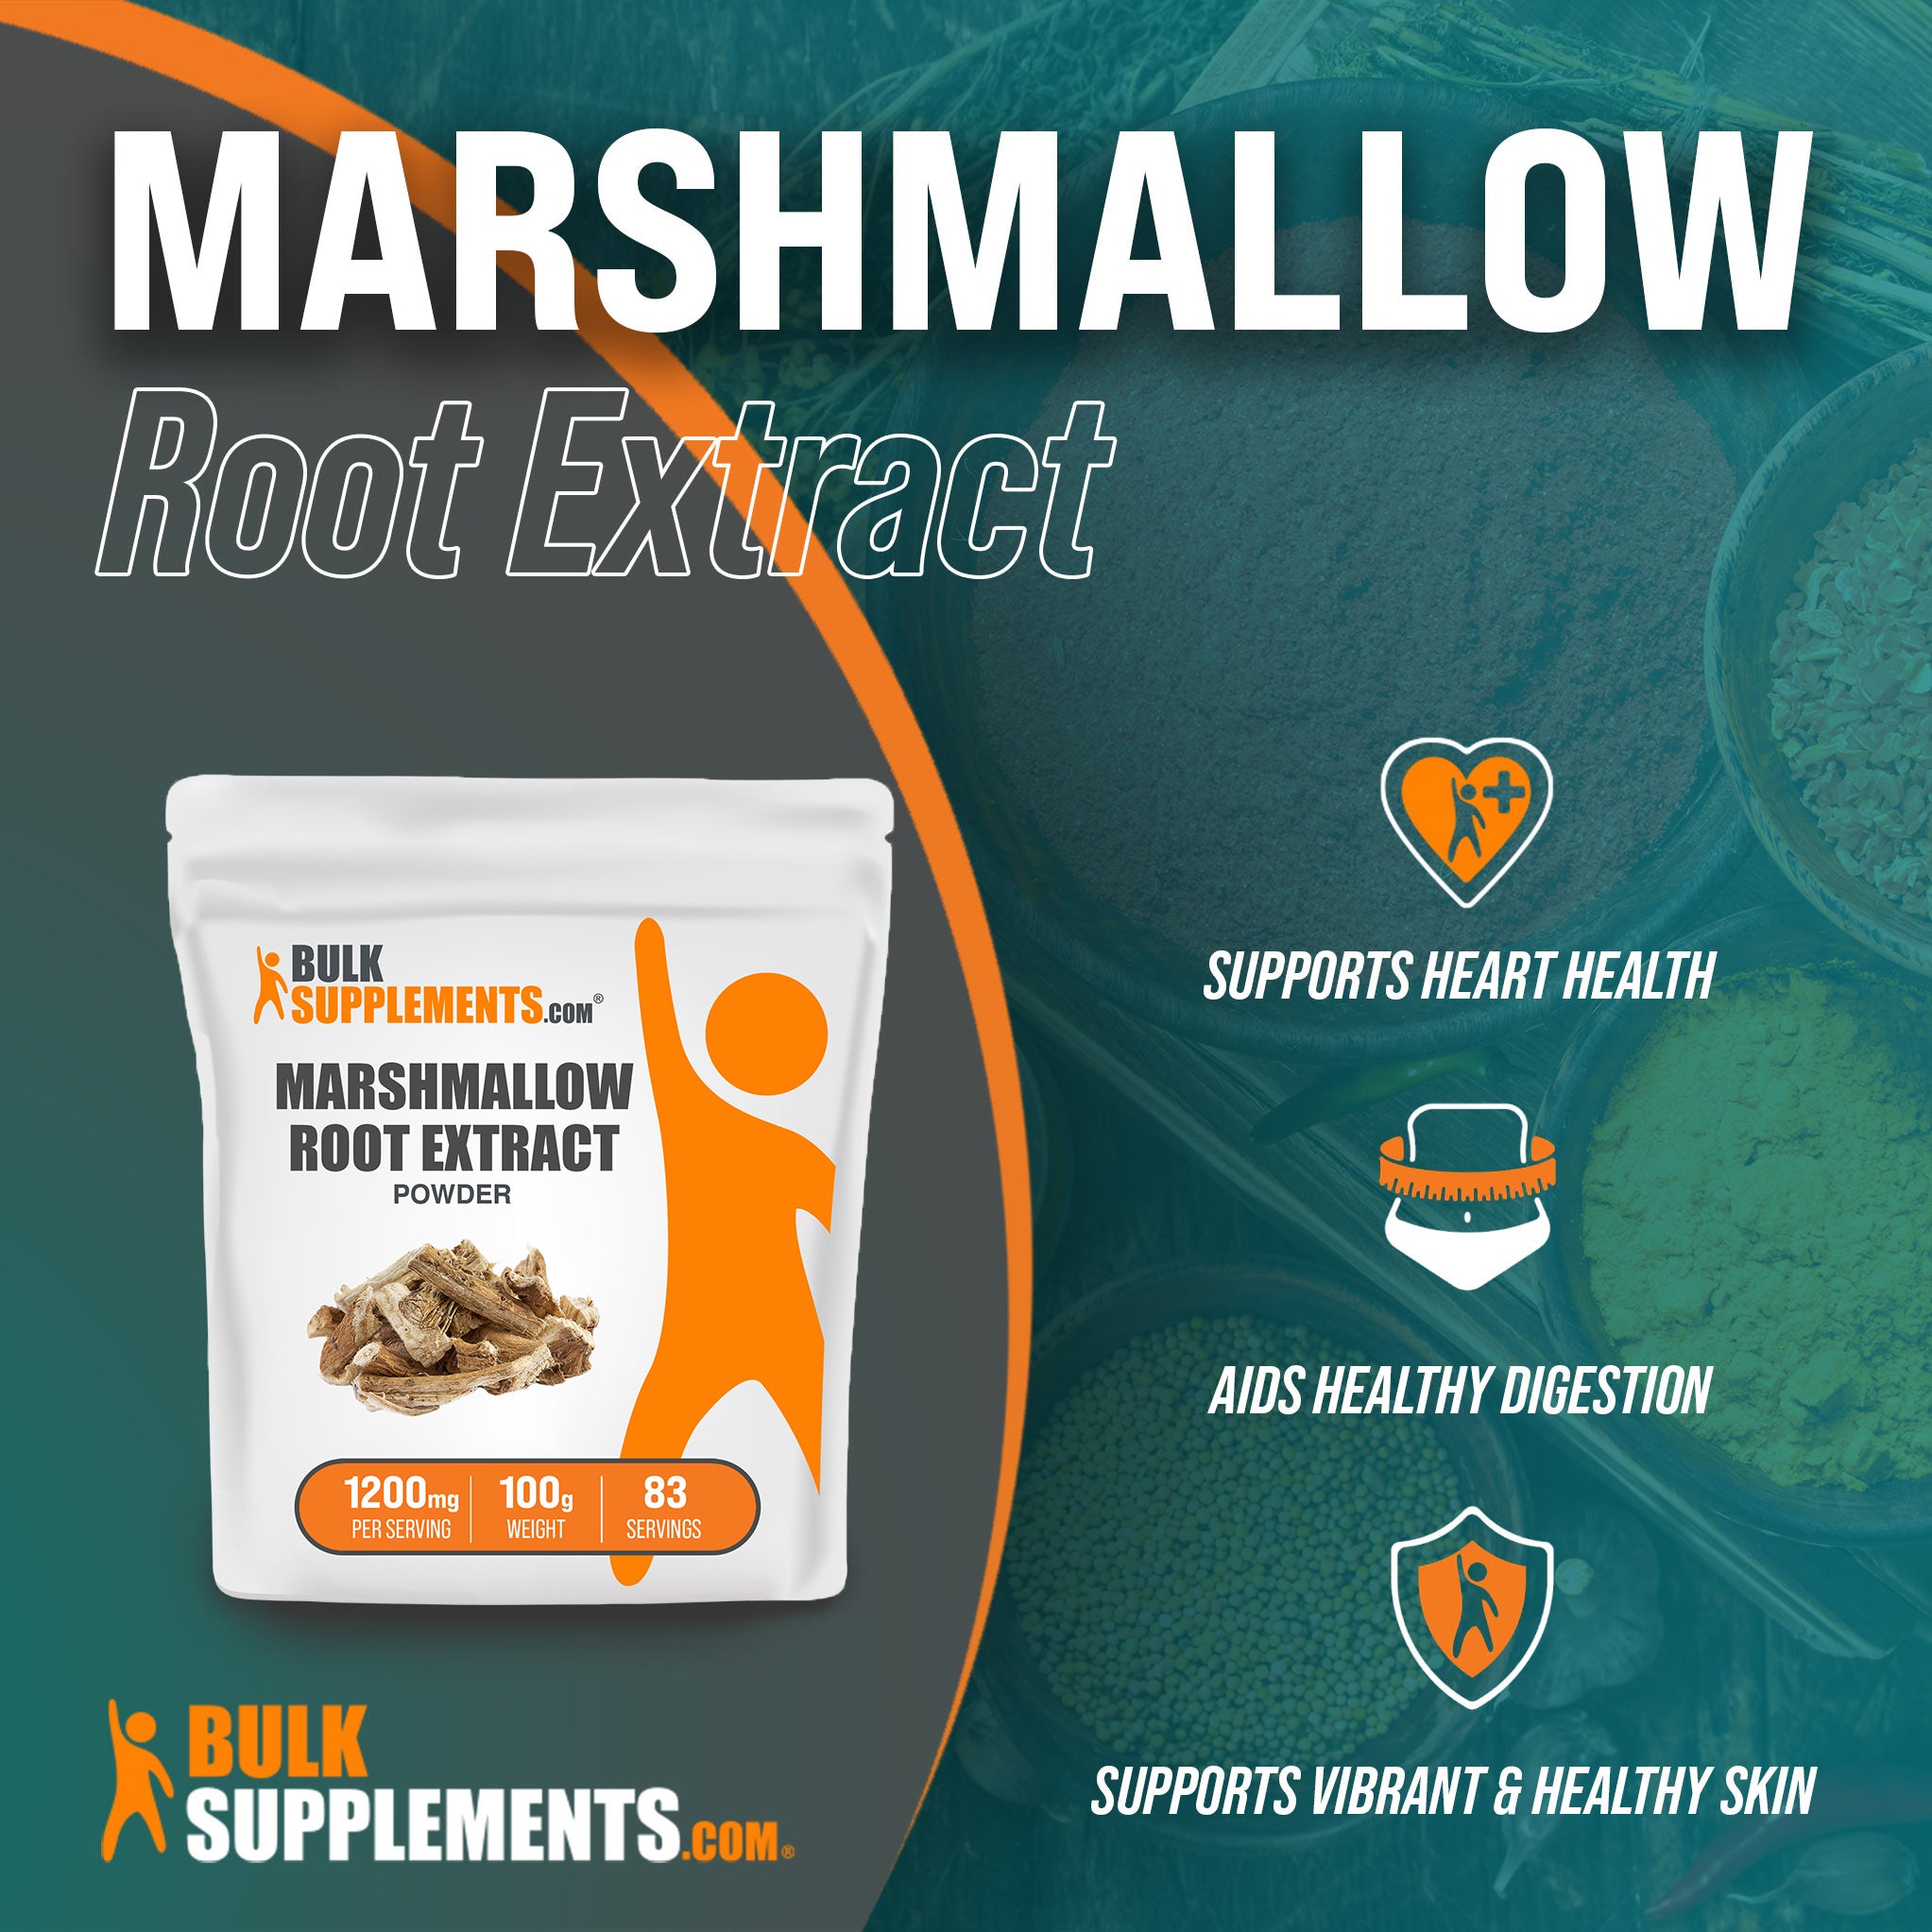 Benefits of Marshmallow Root Extract: supports heart health, aids healthy digestion, supports vibrant and healthy skin